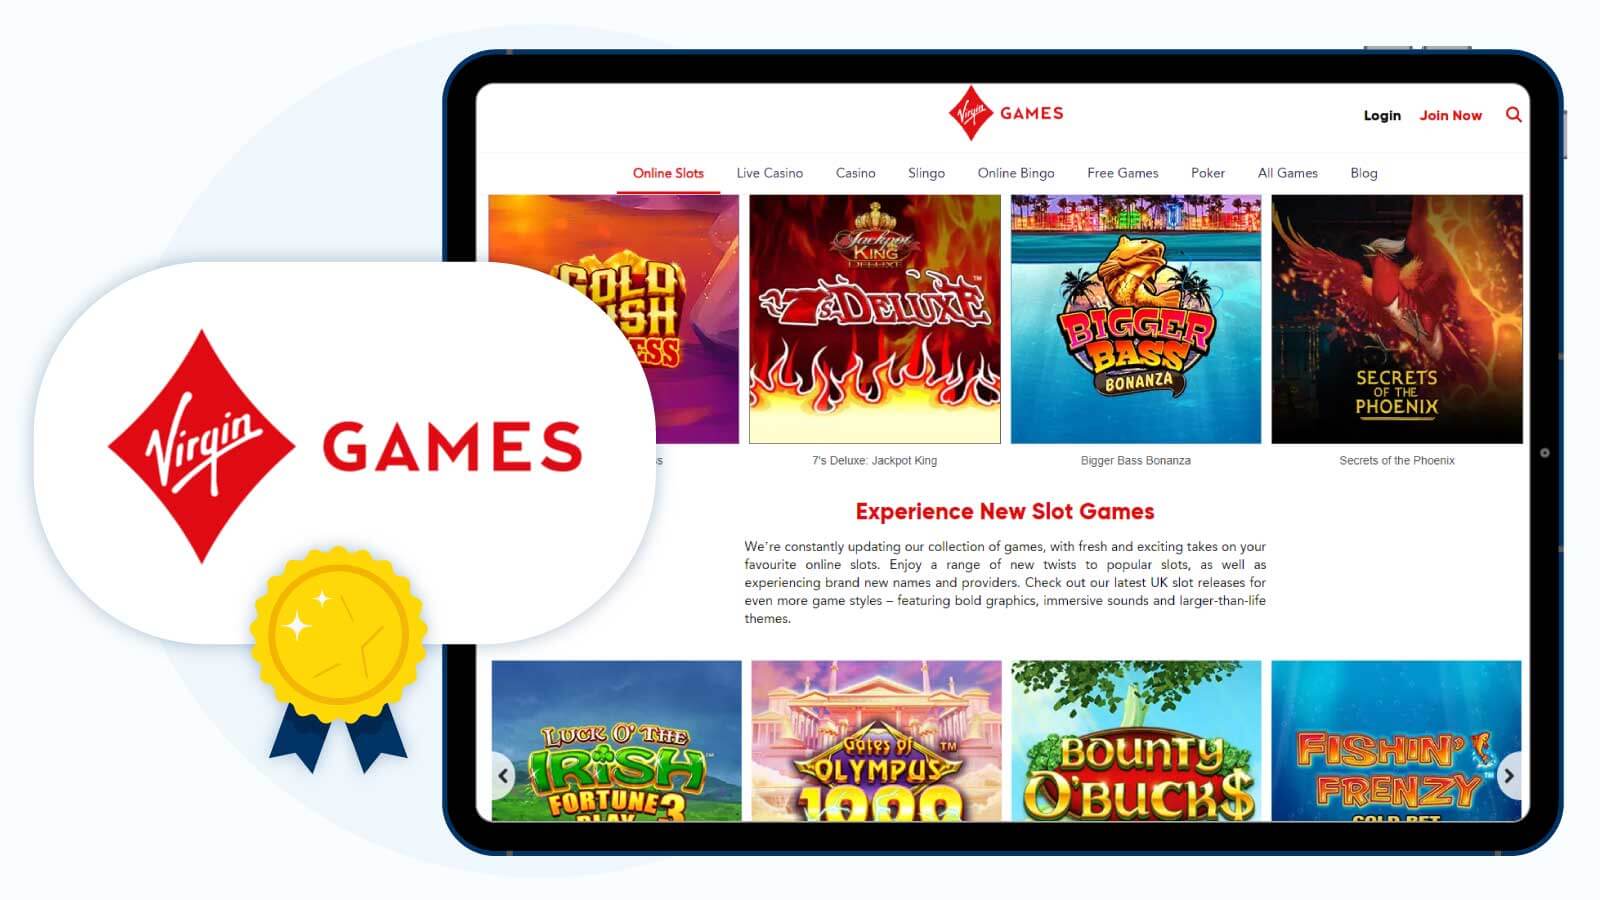 2.Best Casino with Low Wagering Virgin Games Casino